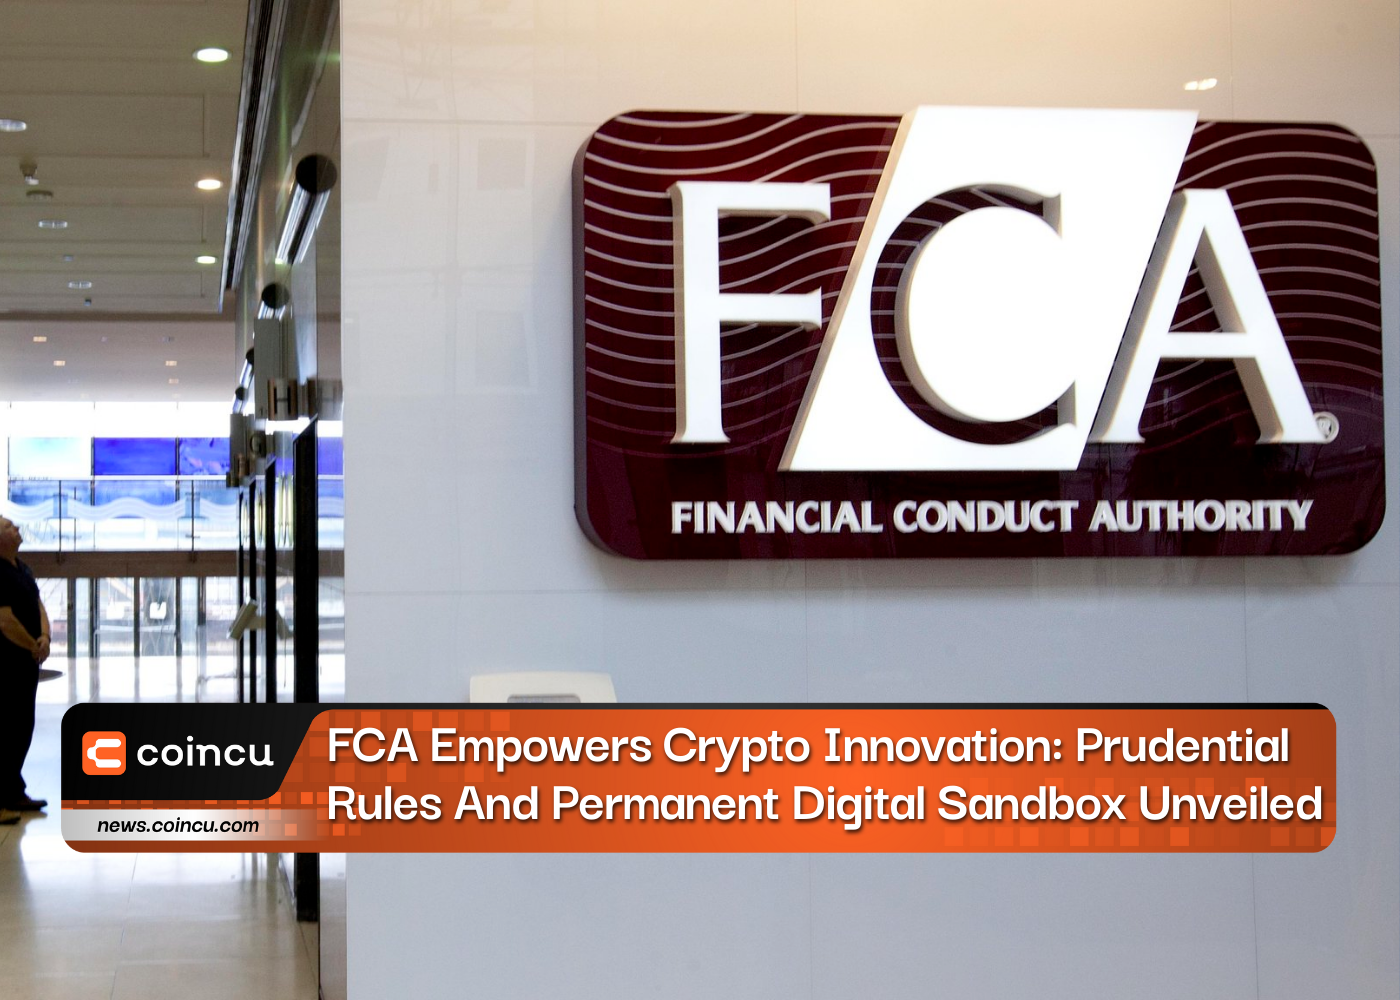 FCA Empowers Crypto Innovation: Prudential Rules And Permanent Digital Sandbox Unveiled